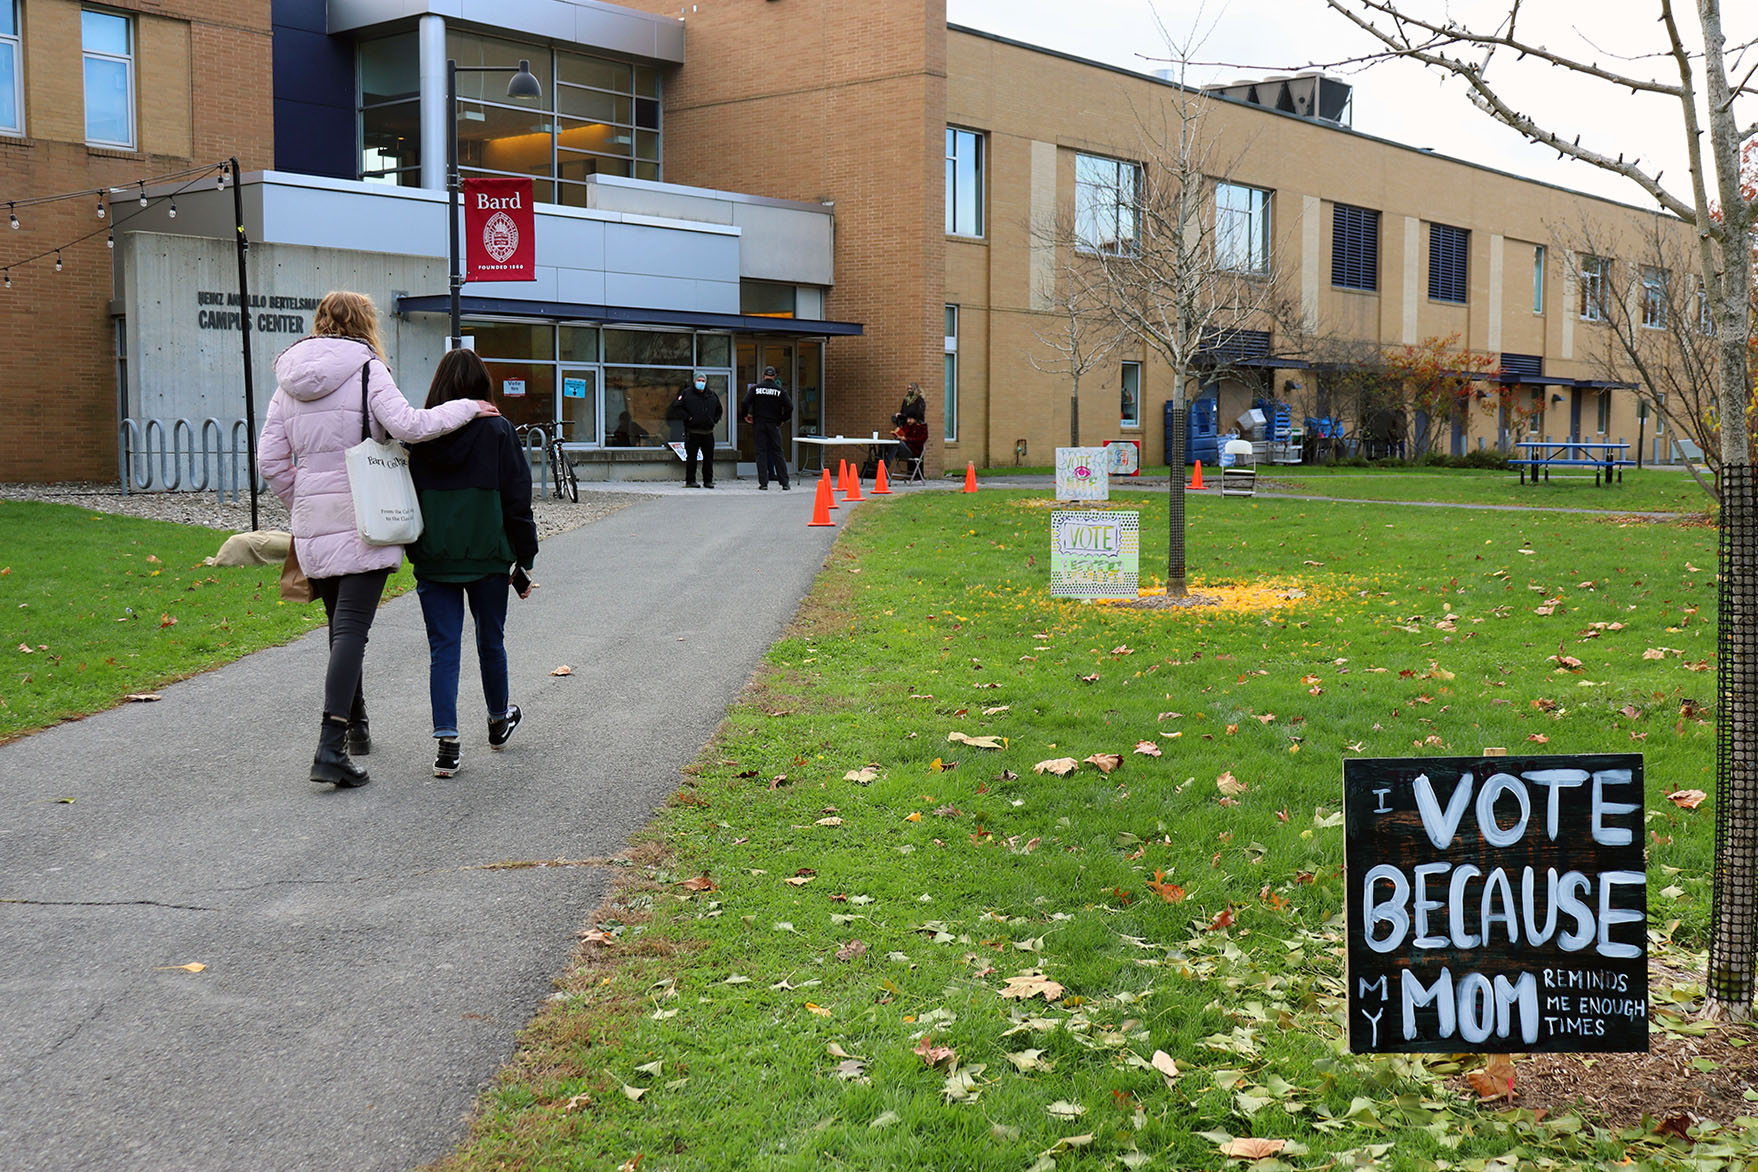 New Legislation Will Bring Polling Places to New York College Campuses